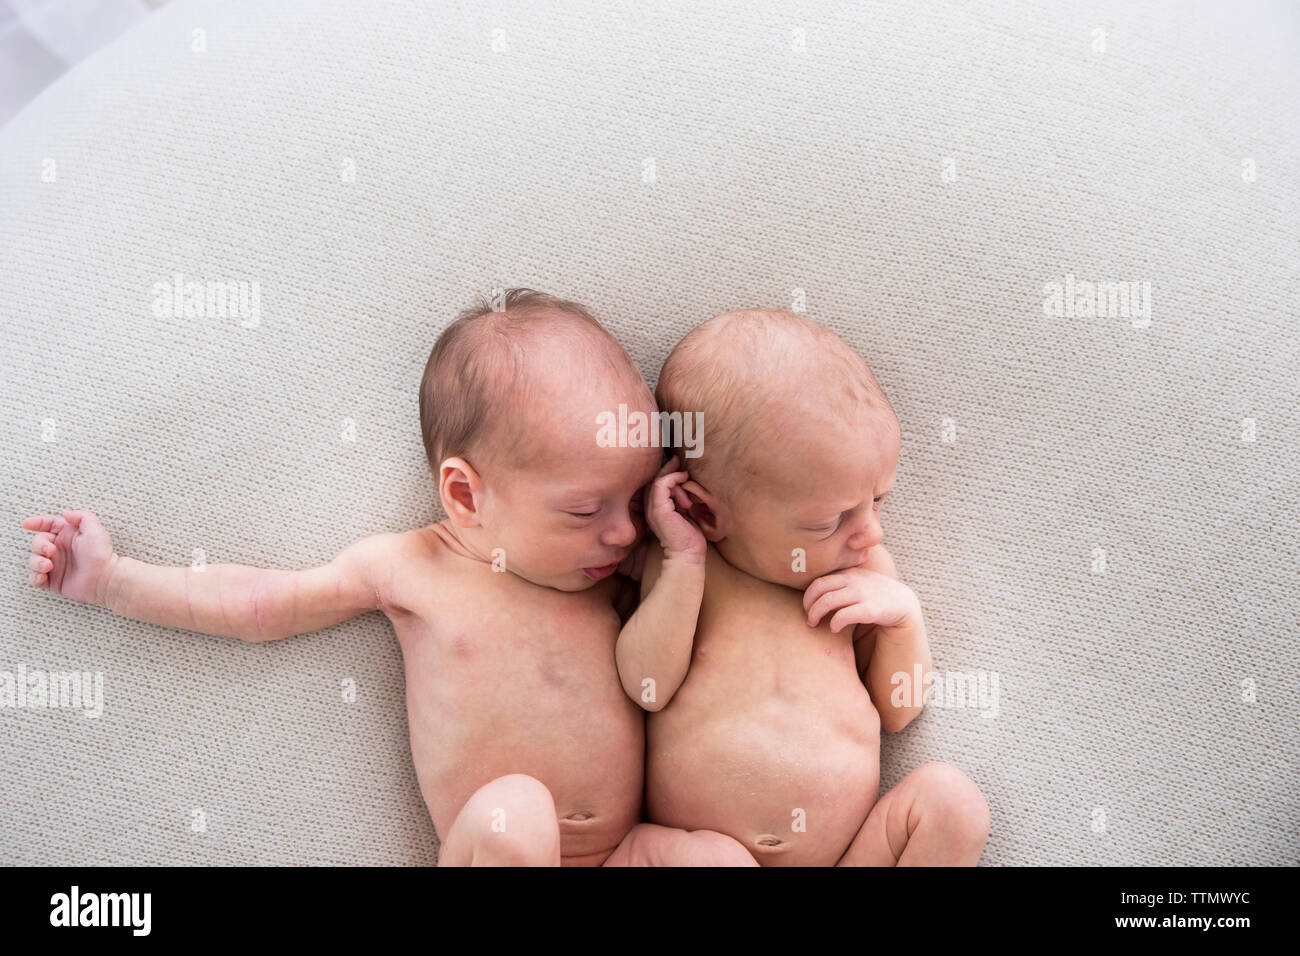 Newborn Twins With Arms and Legs Intertwined Laying on White Blanket Stock Photo